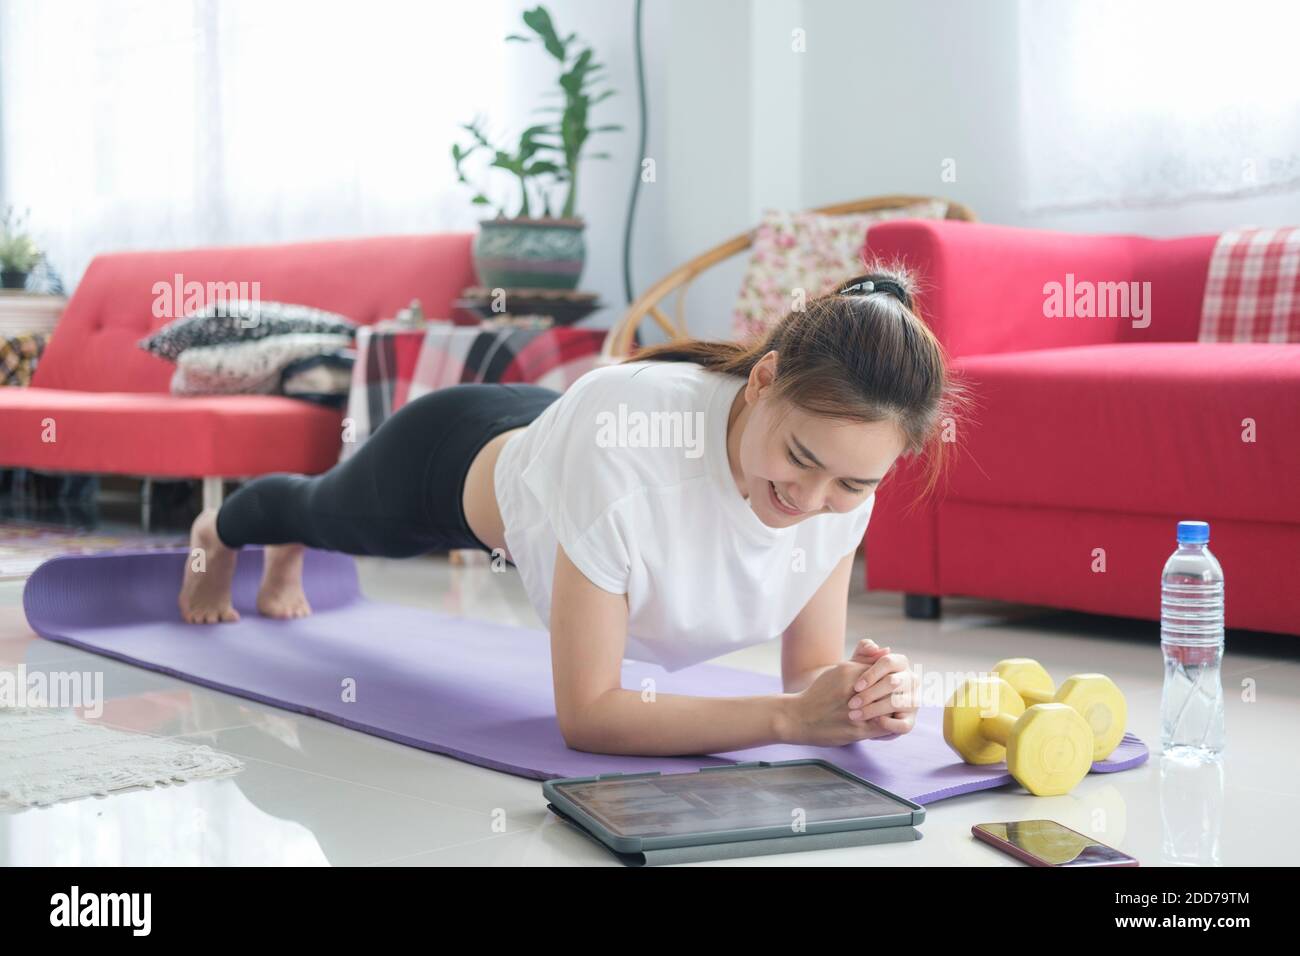 Fit woman doing yoga plank and watching online tutorials, training in living room. Stay at home life style. Stock Photo